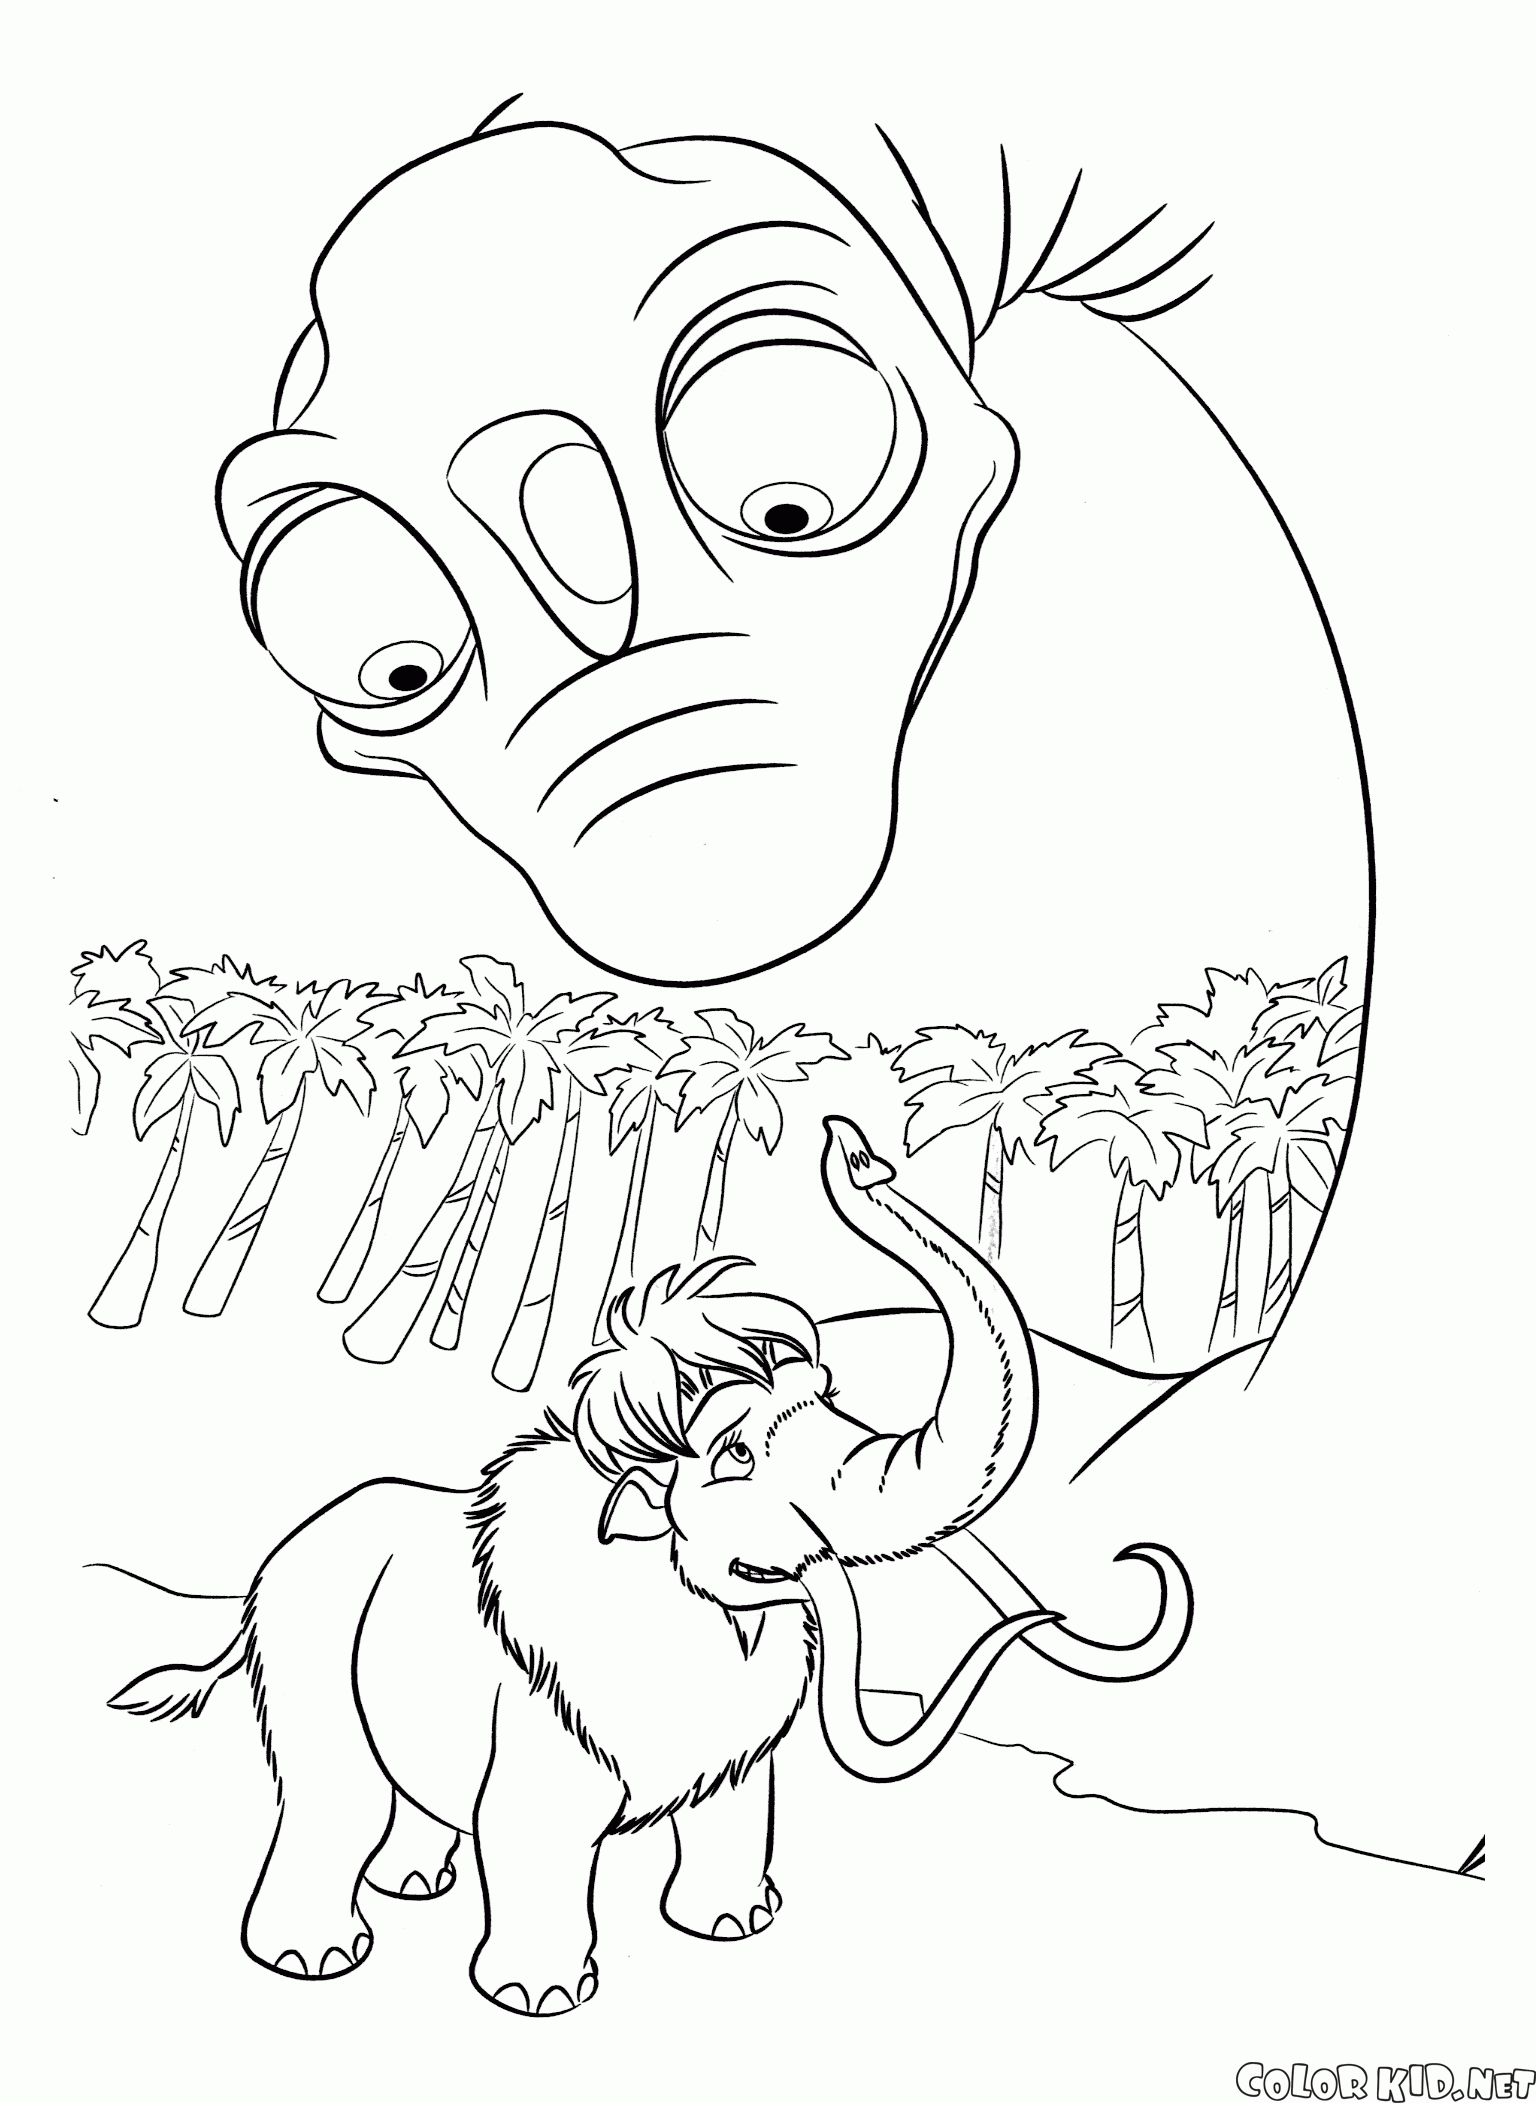 Coloring page - Ice Age: Dawn of the Dinosaurs